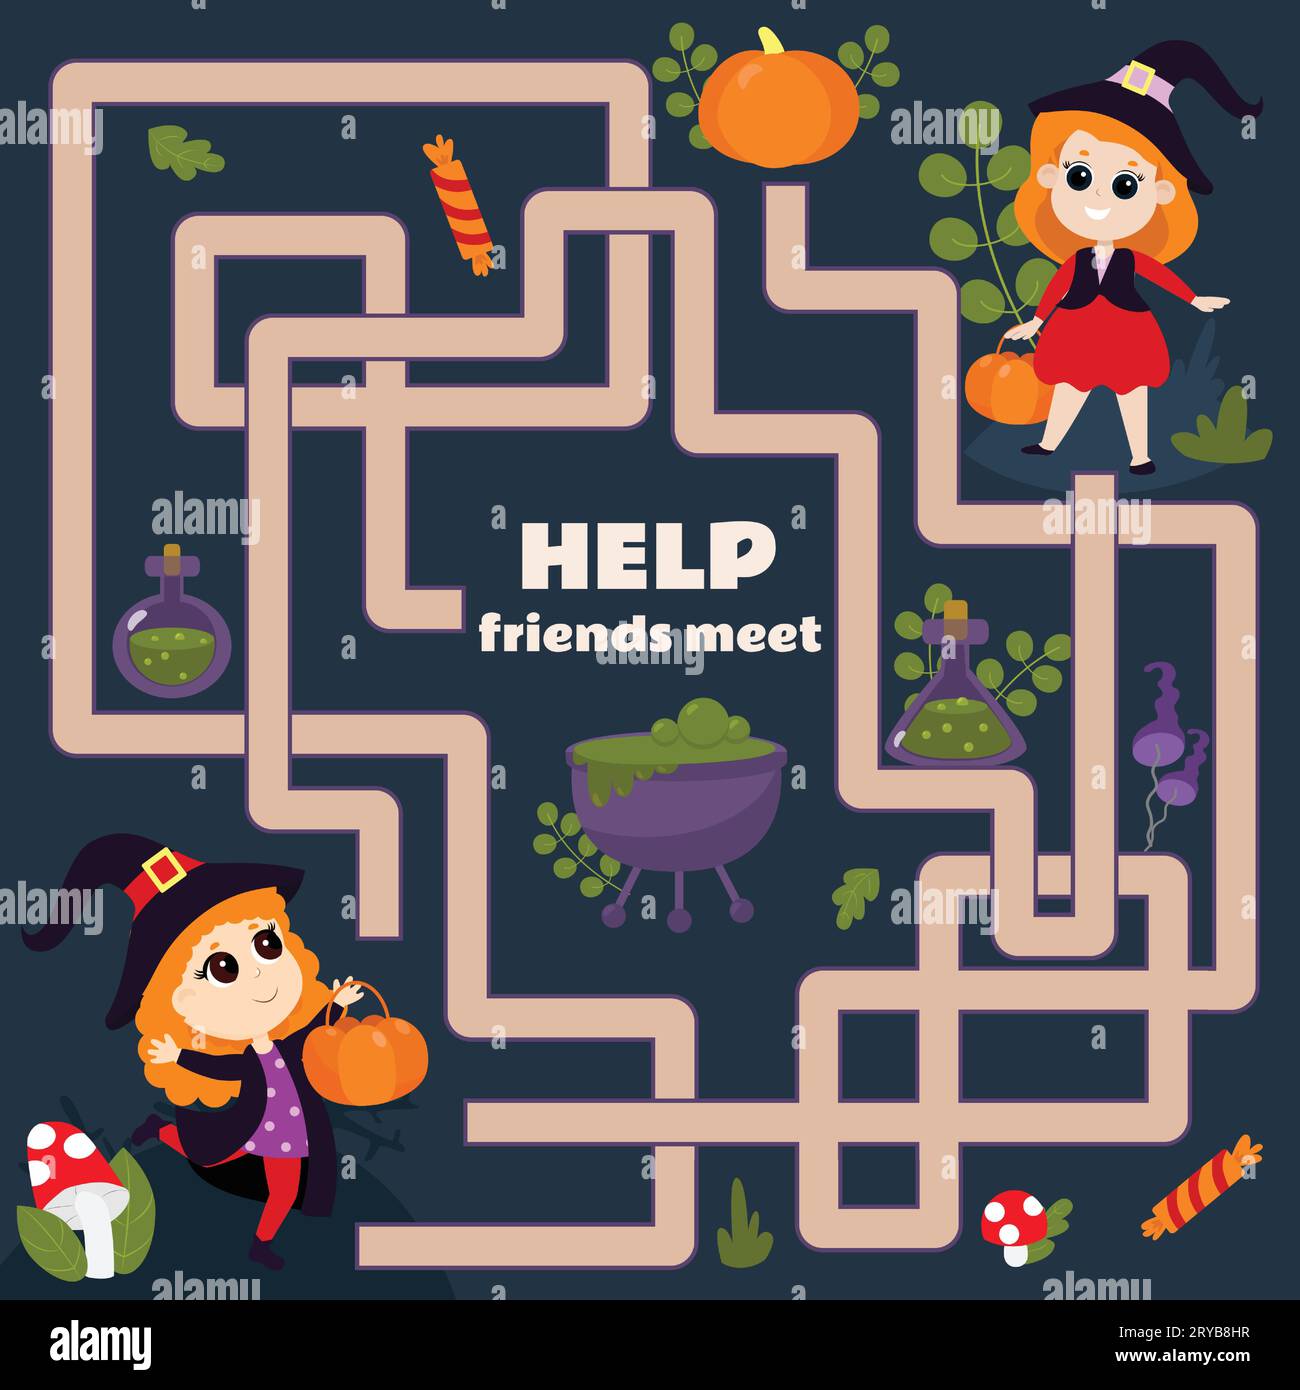 Maze game for children Help the witches meet. A Halloween game with a cute character. Worksheet for kindergartens and schools. Stock Vector